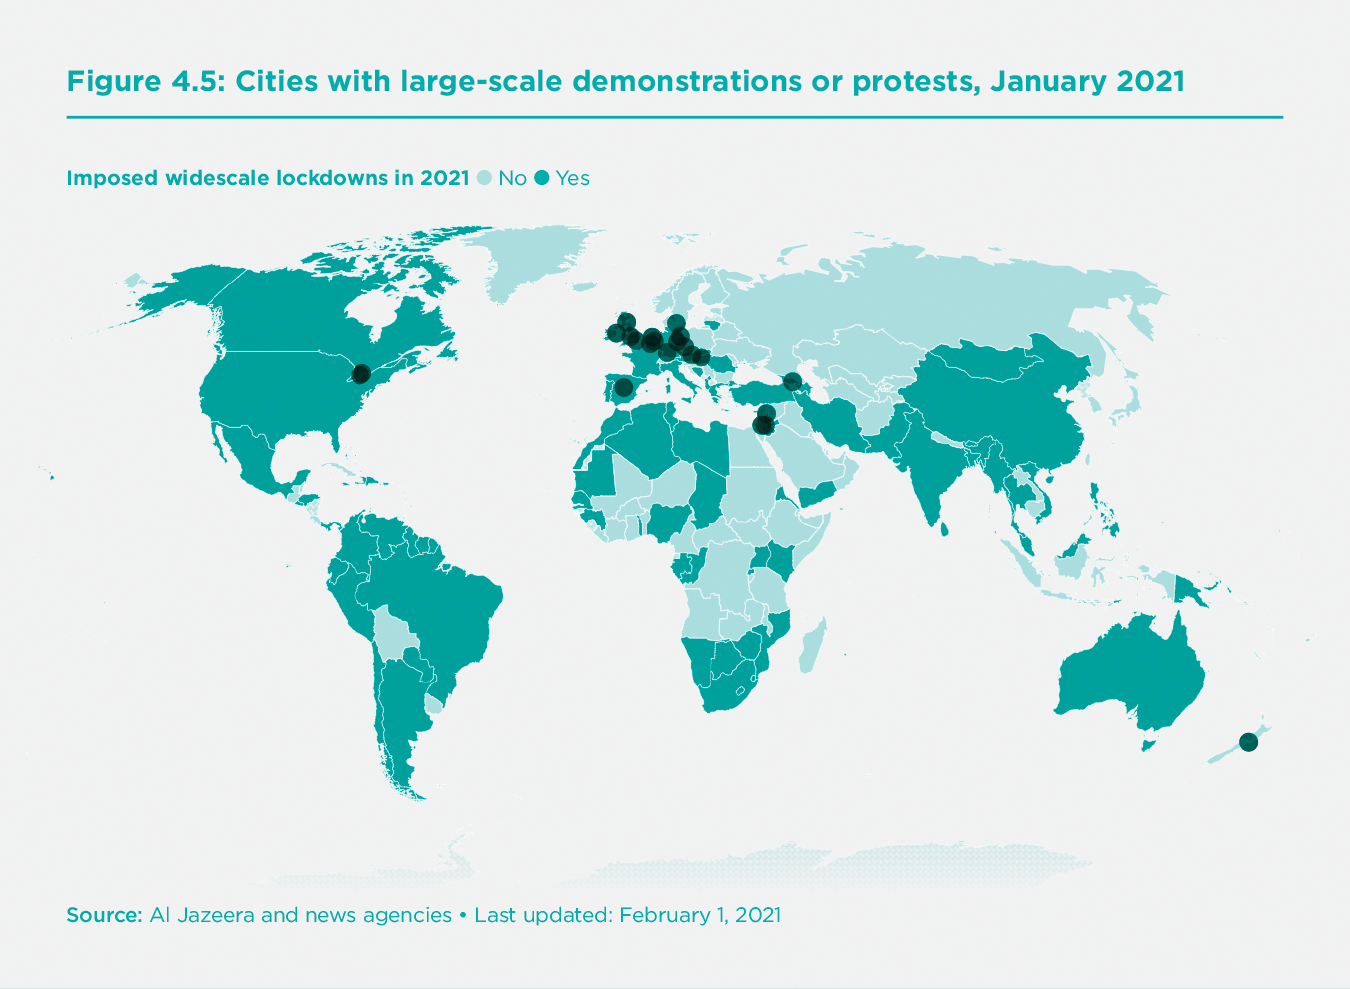 Figure 4.5. Cities with Large-Scale Demonstrations or Protests, January 2021